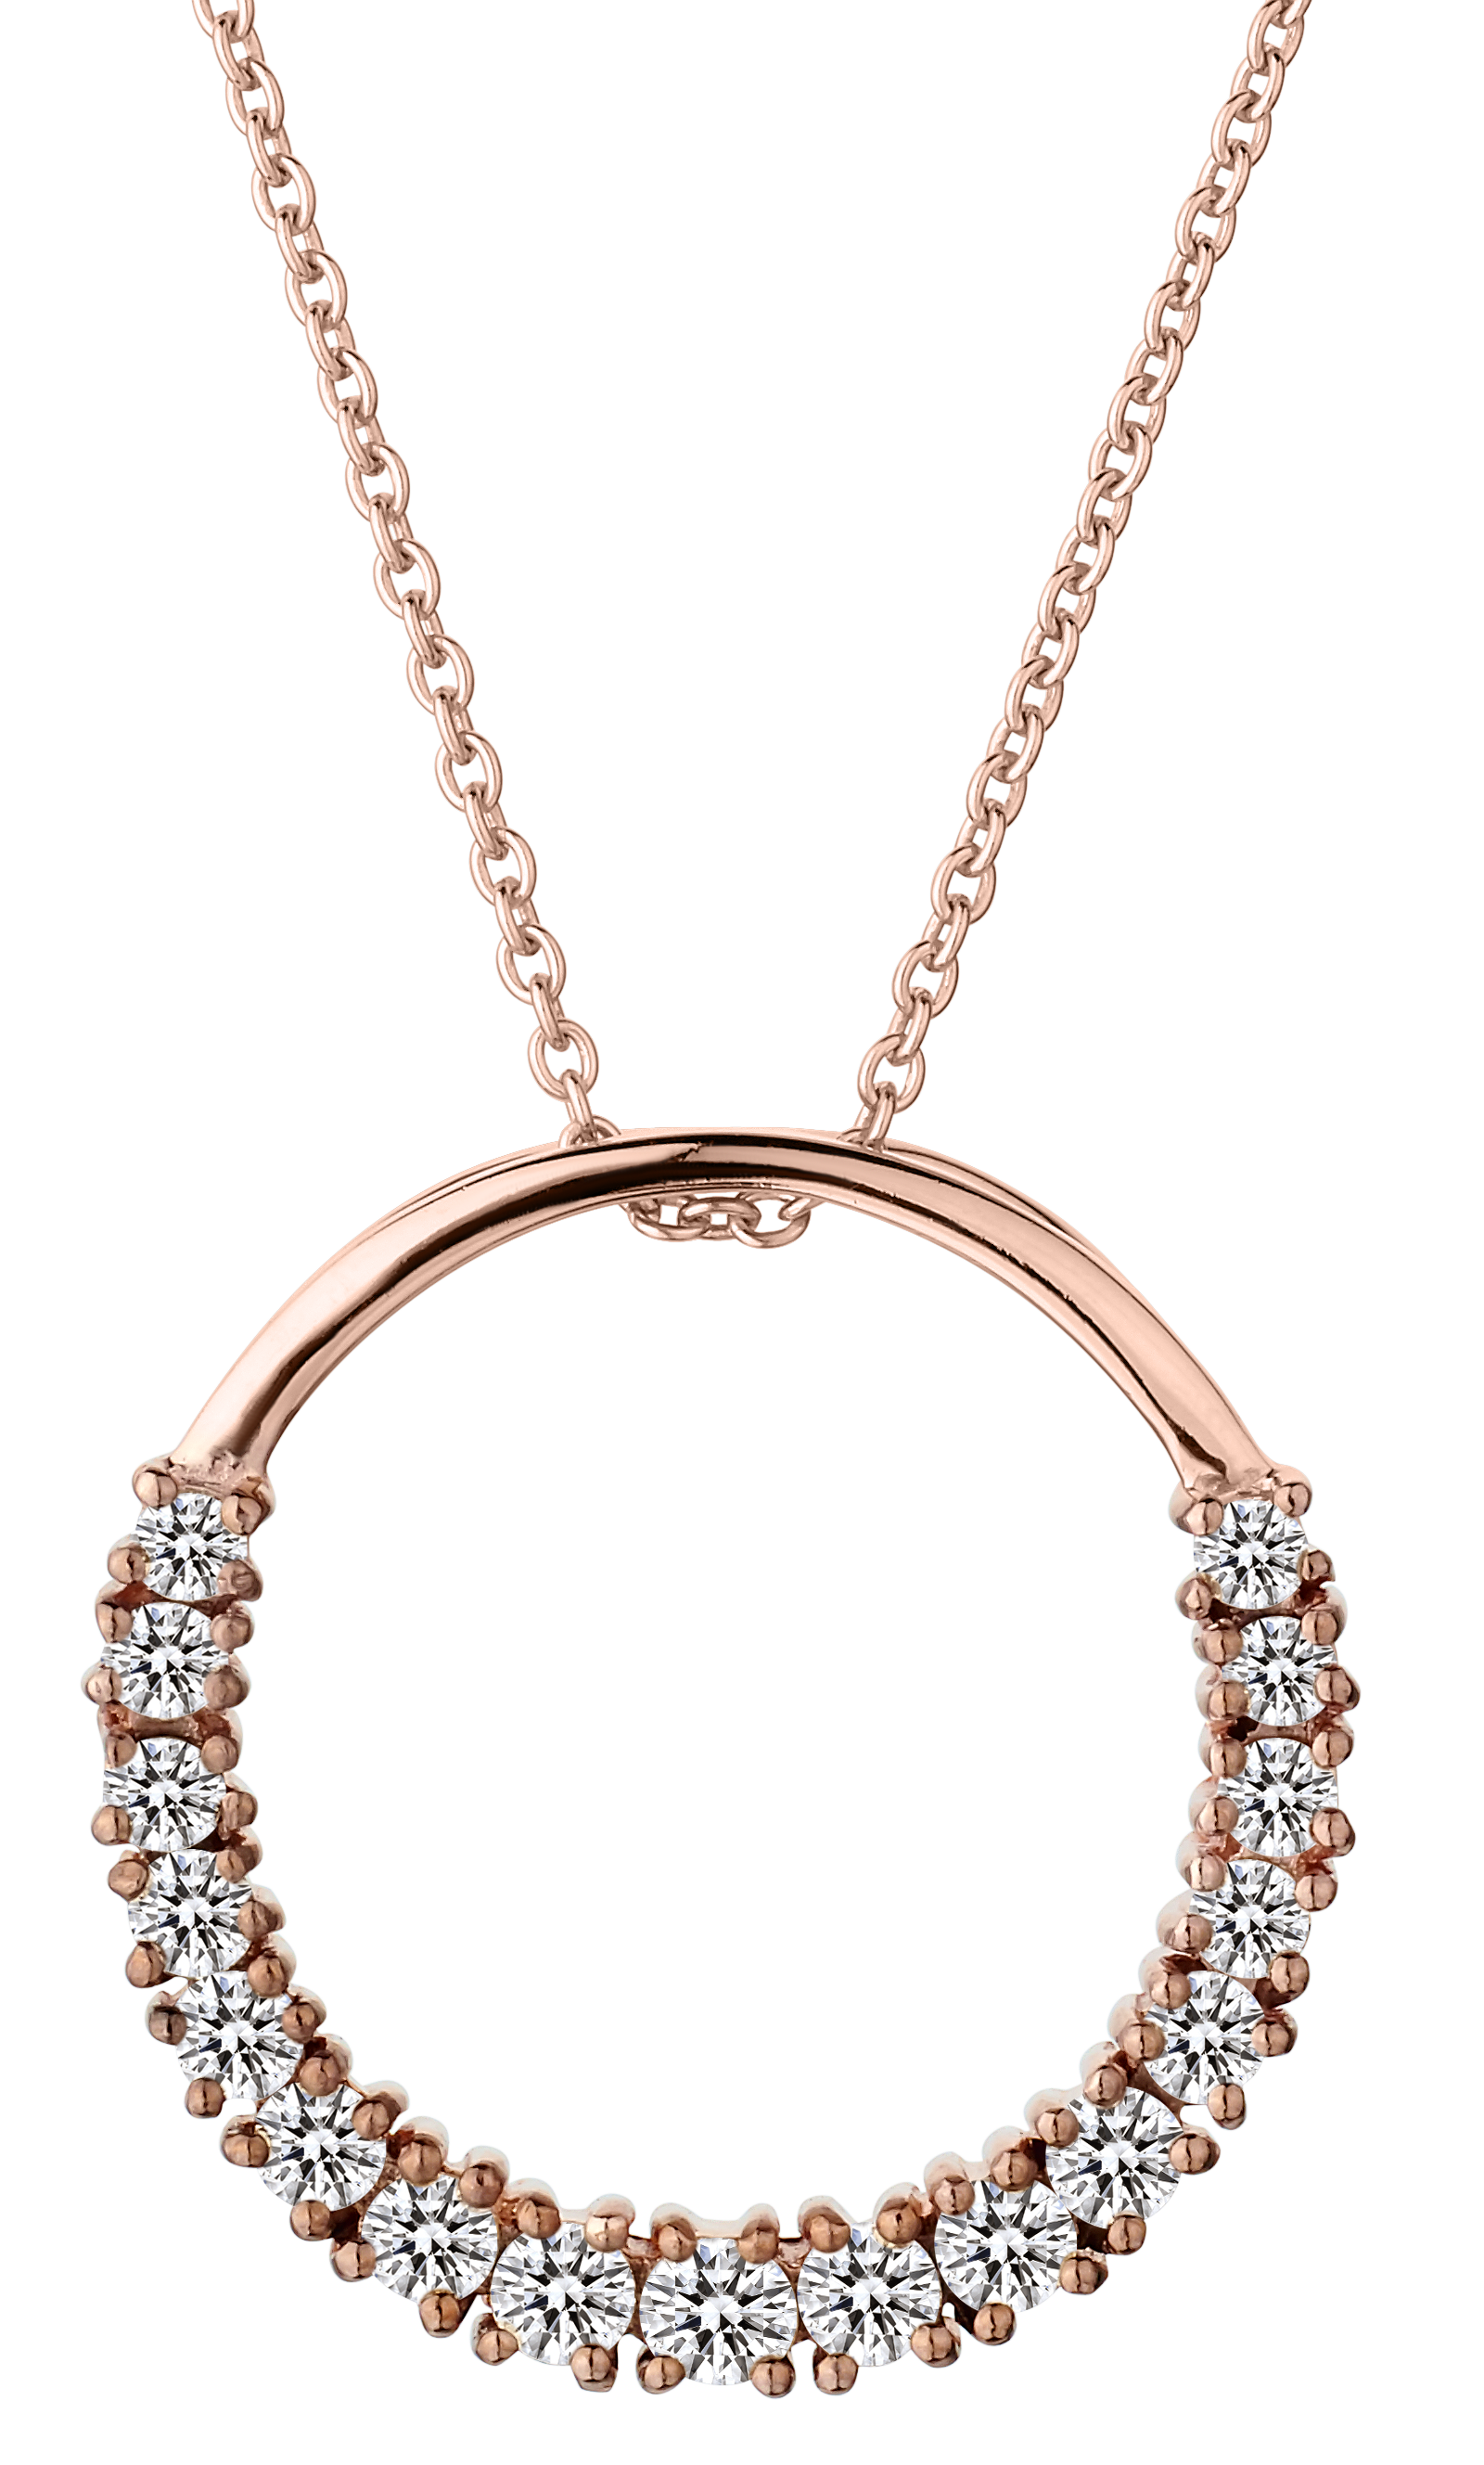 .75 Carat Champagne Diamond Pendant,  Sterling Silver (18kt Rose Gold Plated). Necklaces and Pendants. Griffin Jewellery Designs. 